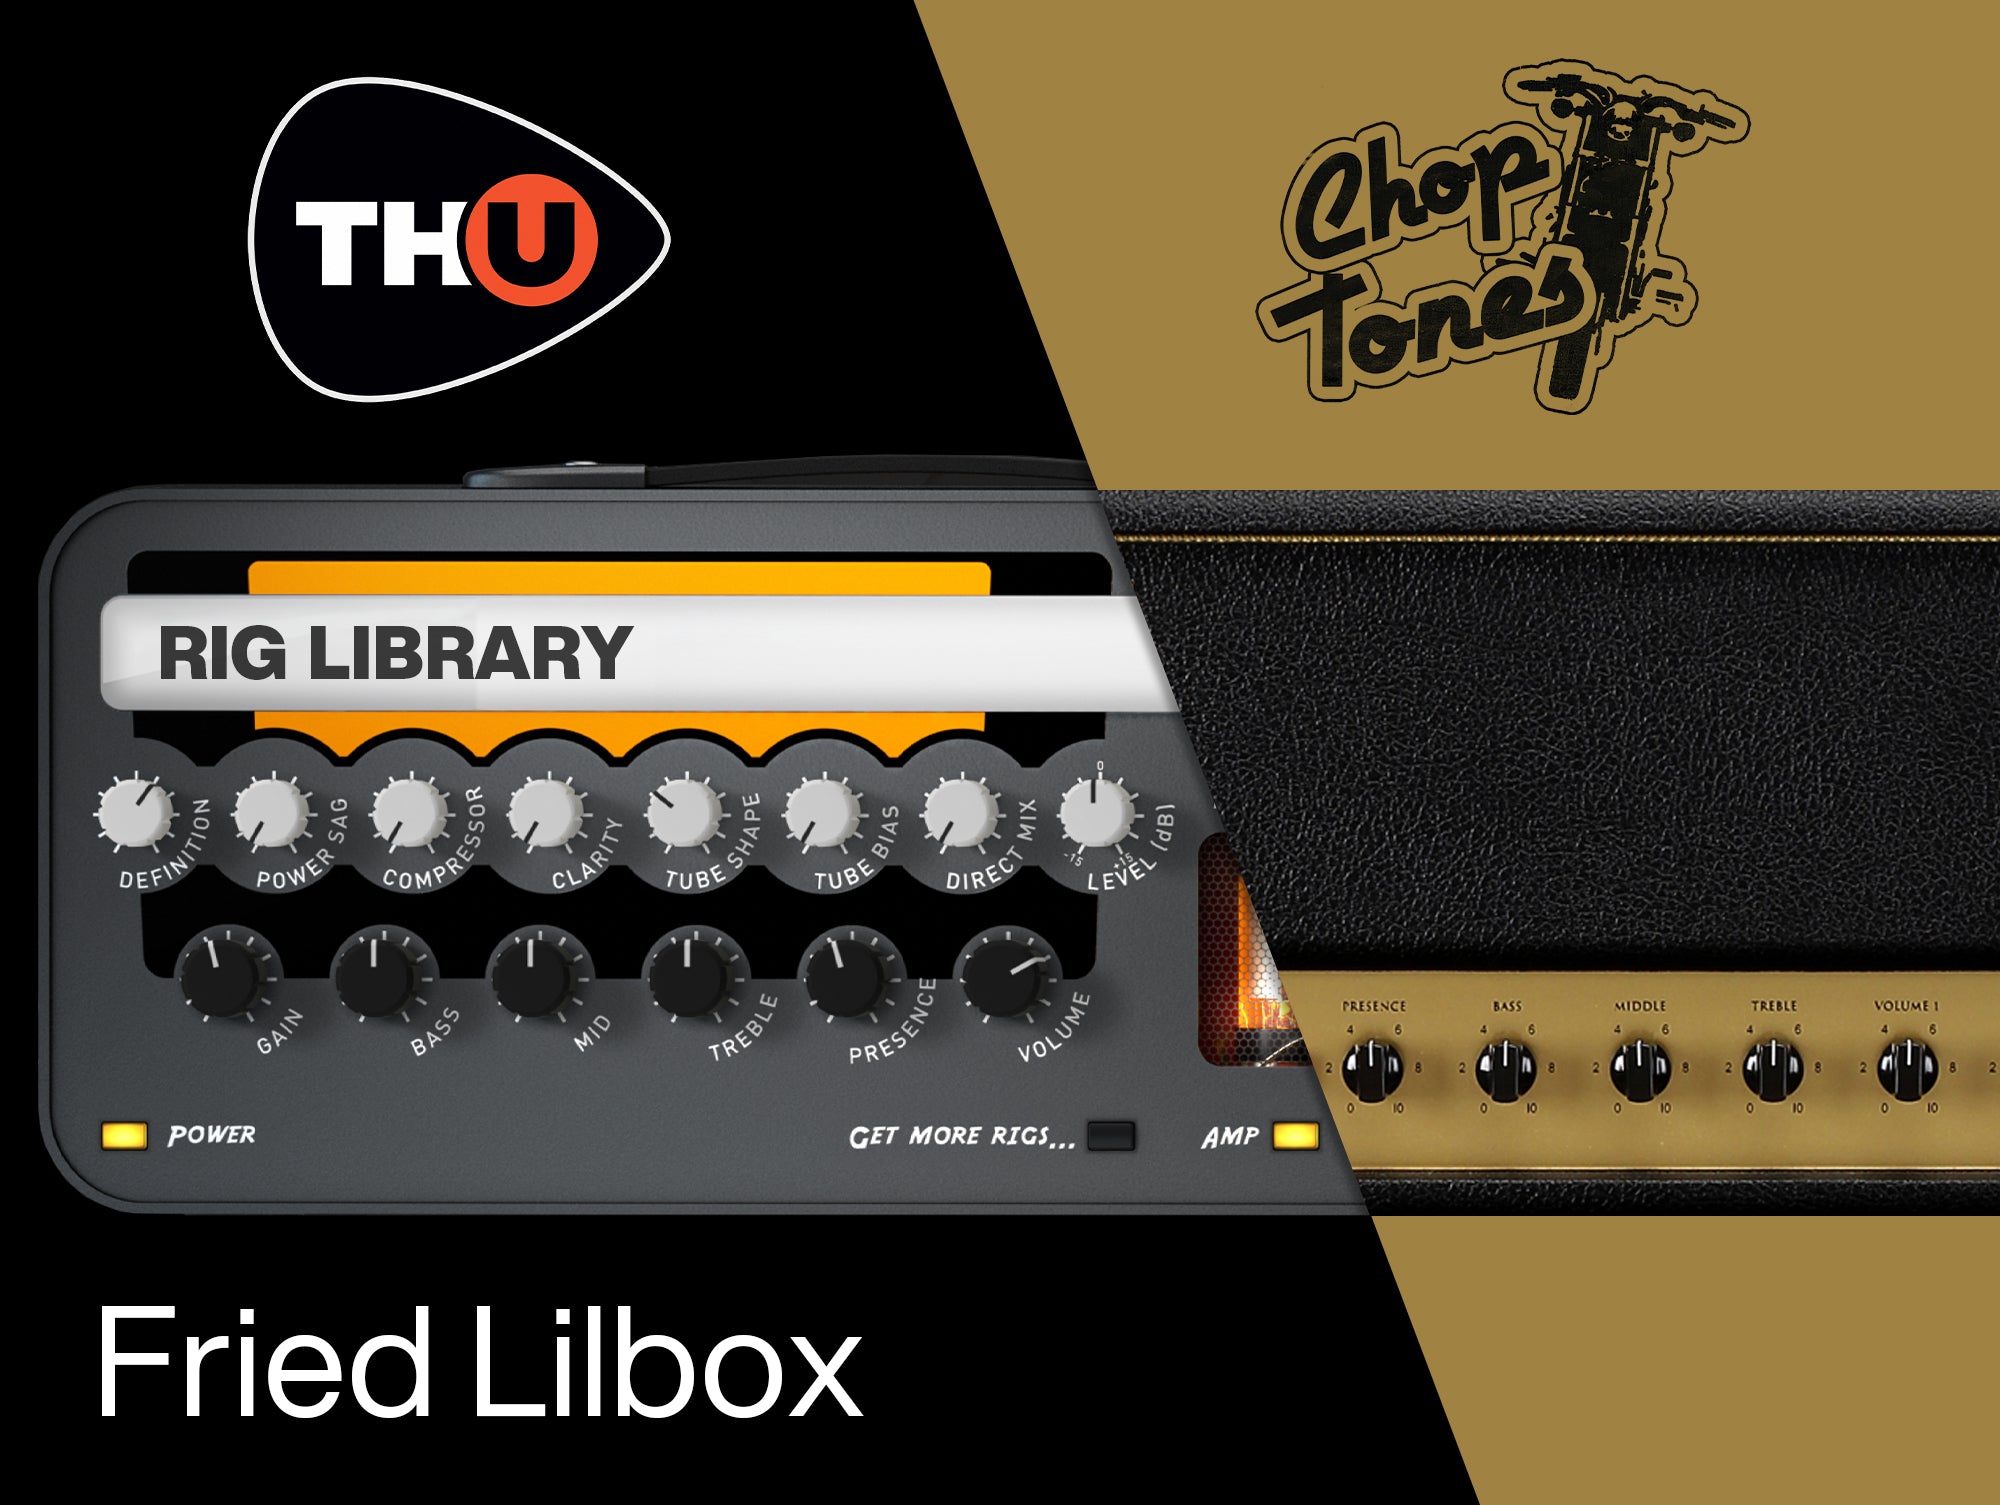 Overloud Fried Lilbox - Rig Library for TH-U